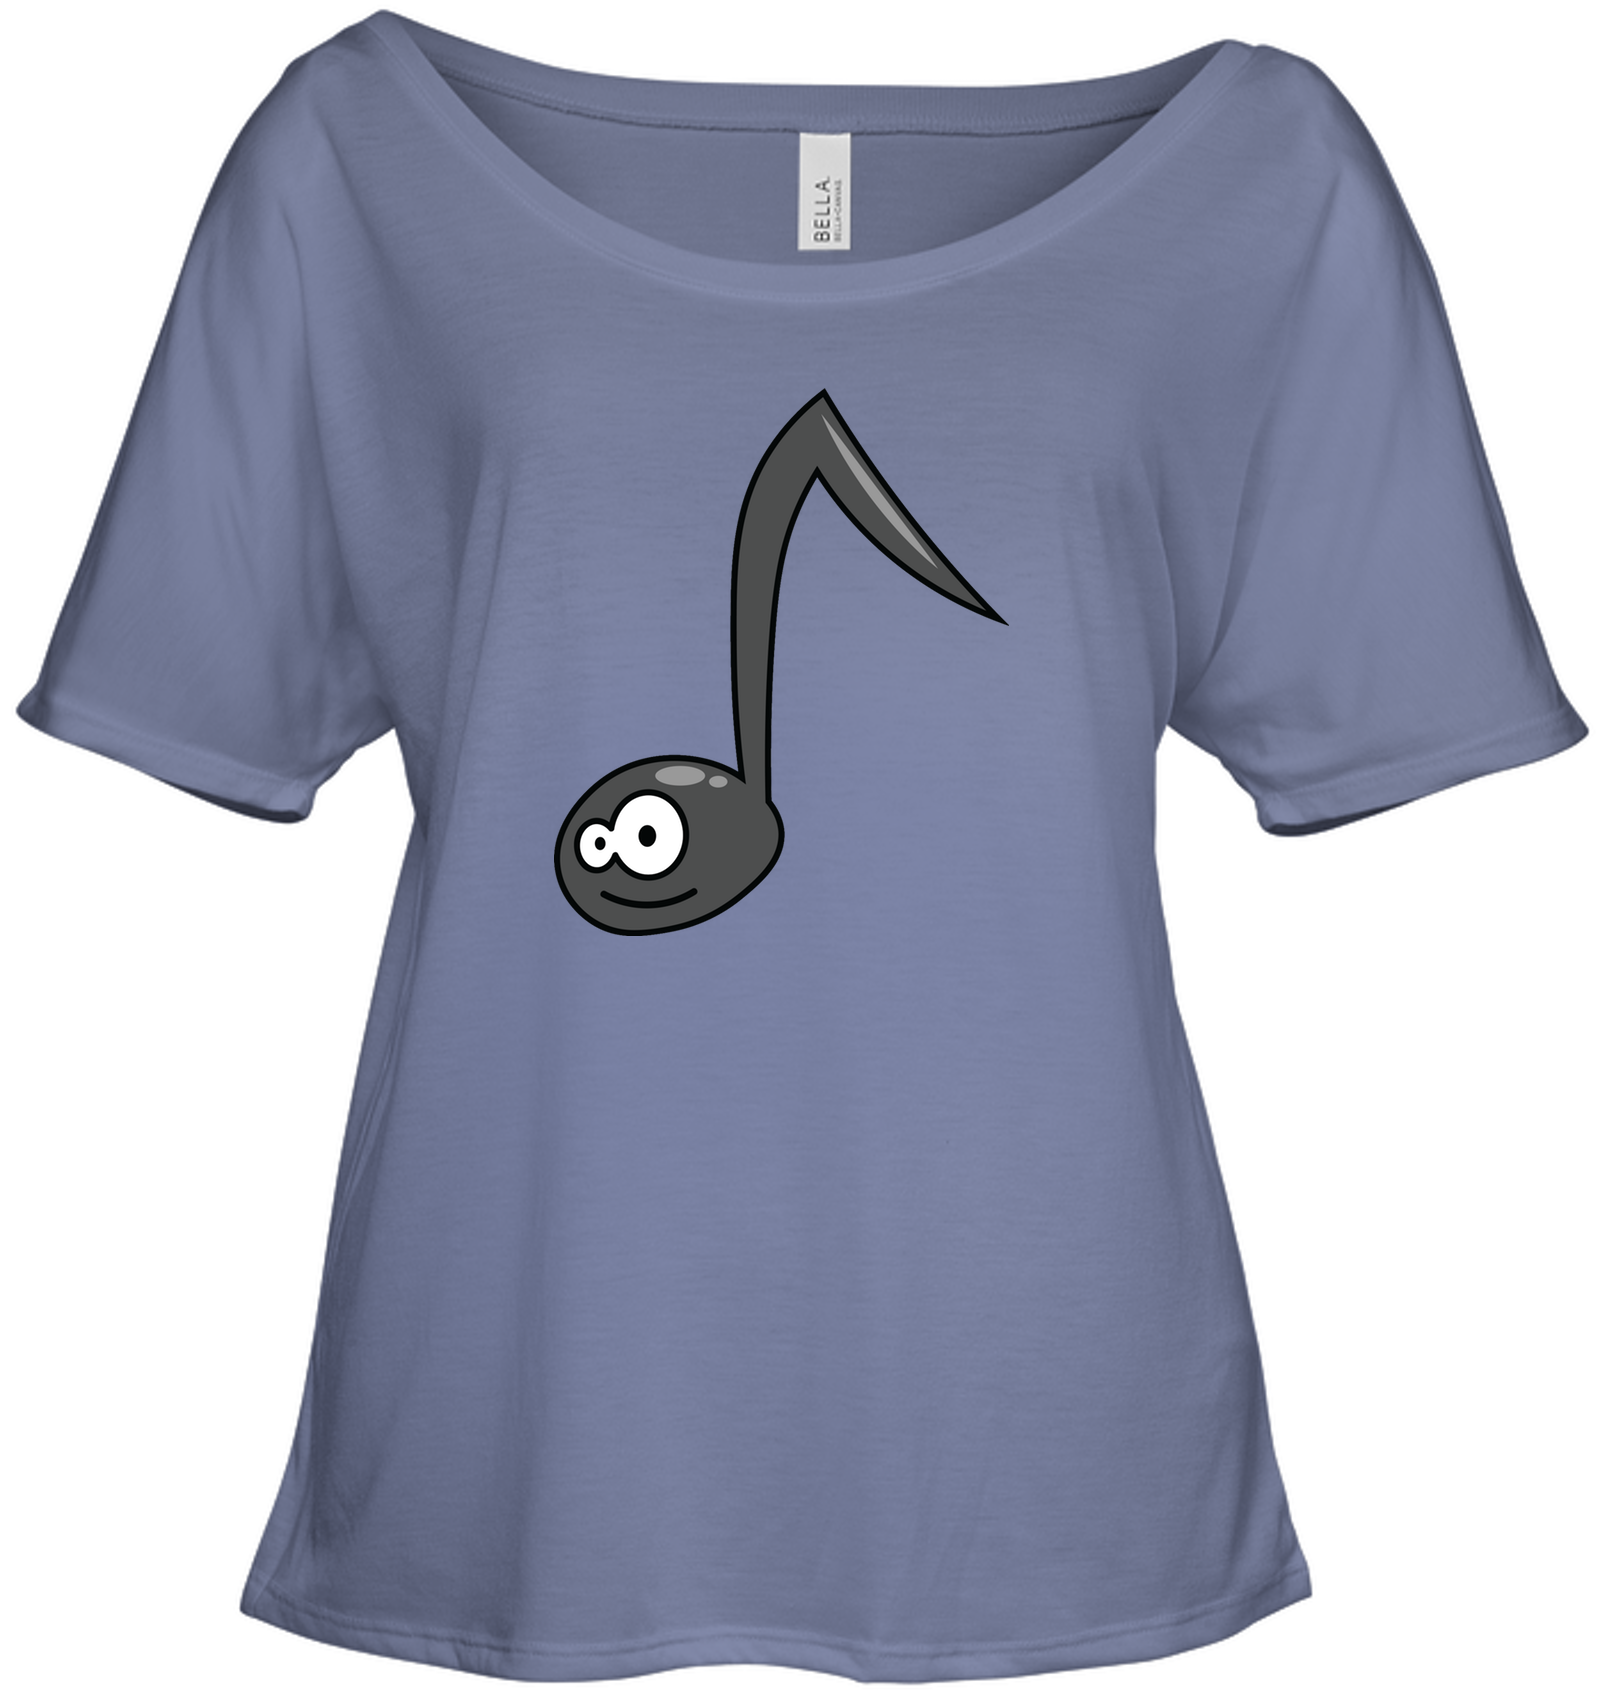 Curious Note - Bella + Canvas Women's Slouchy Tee